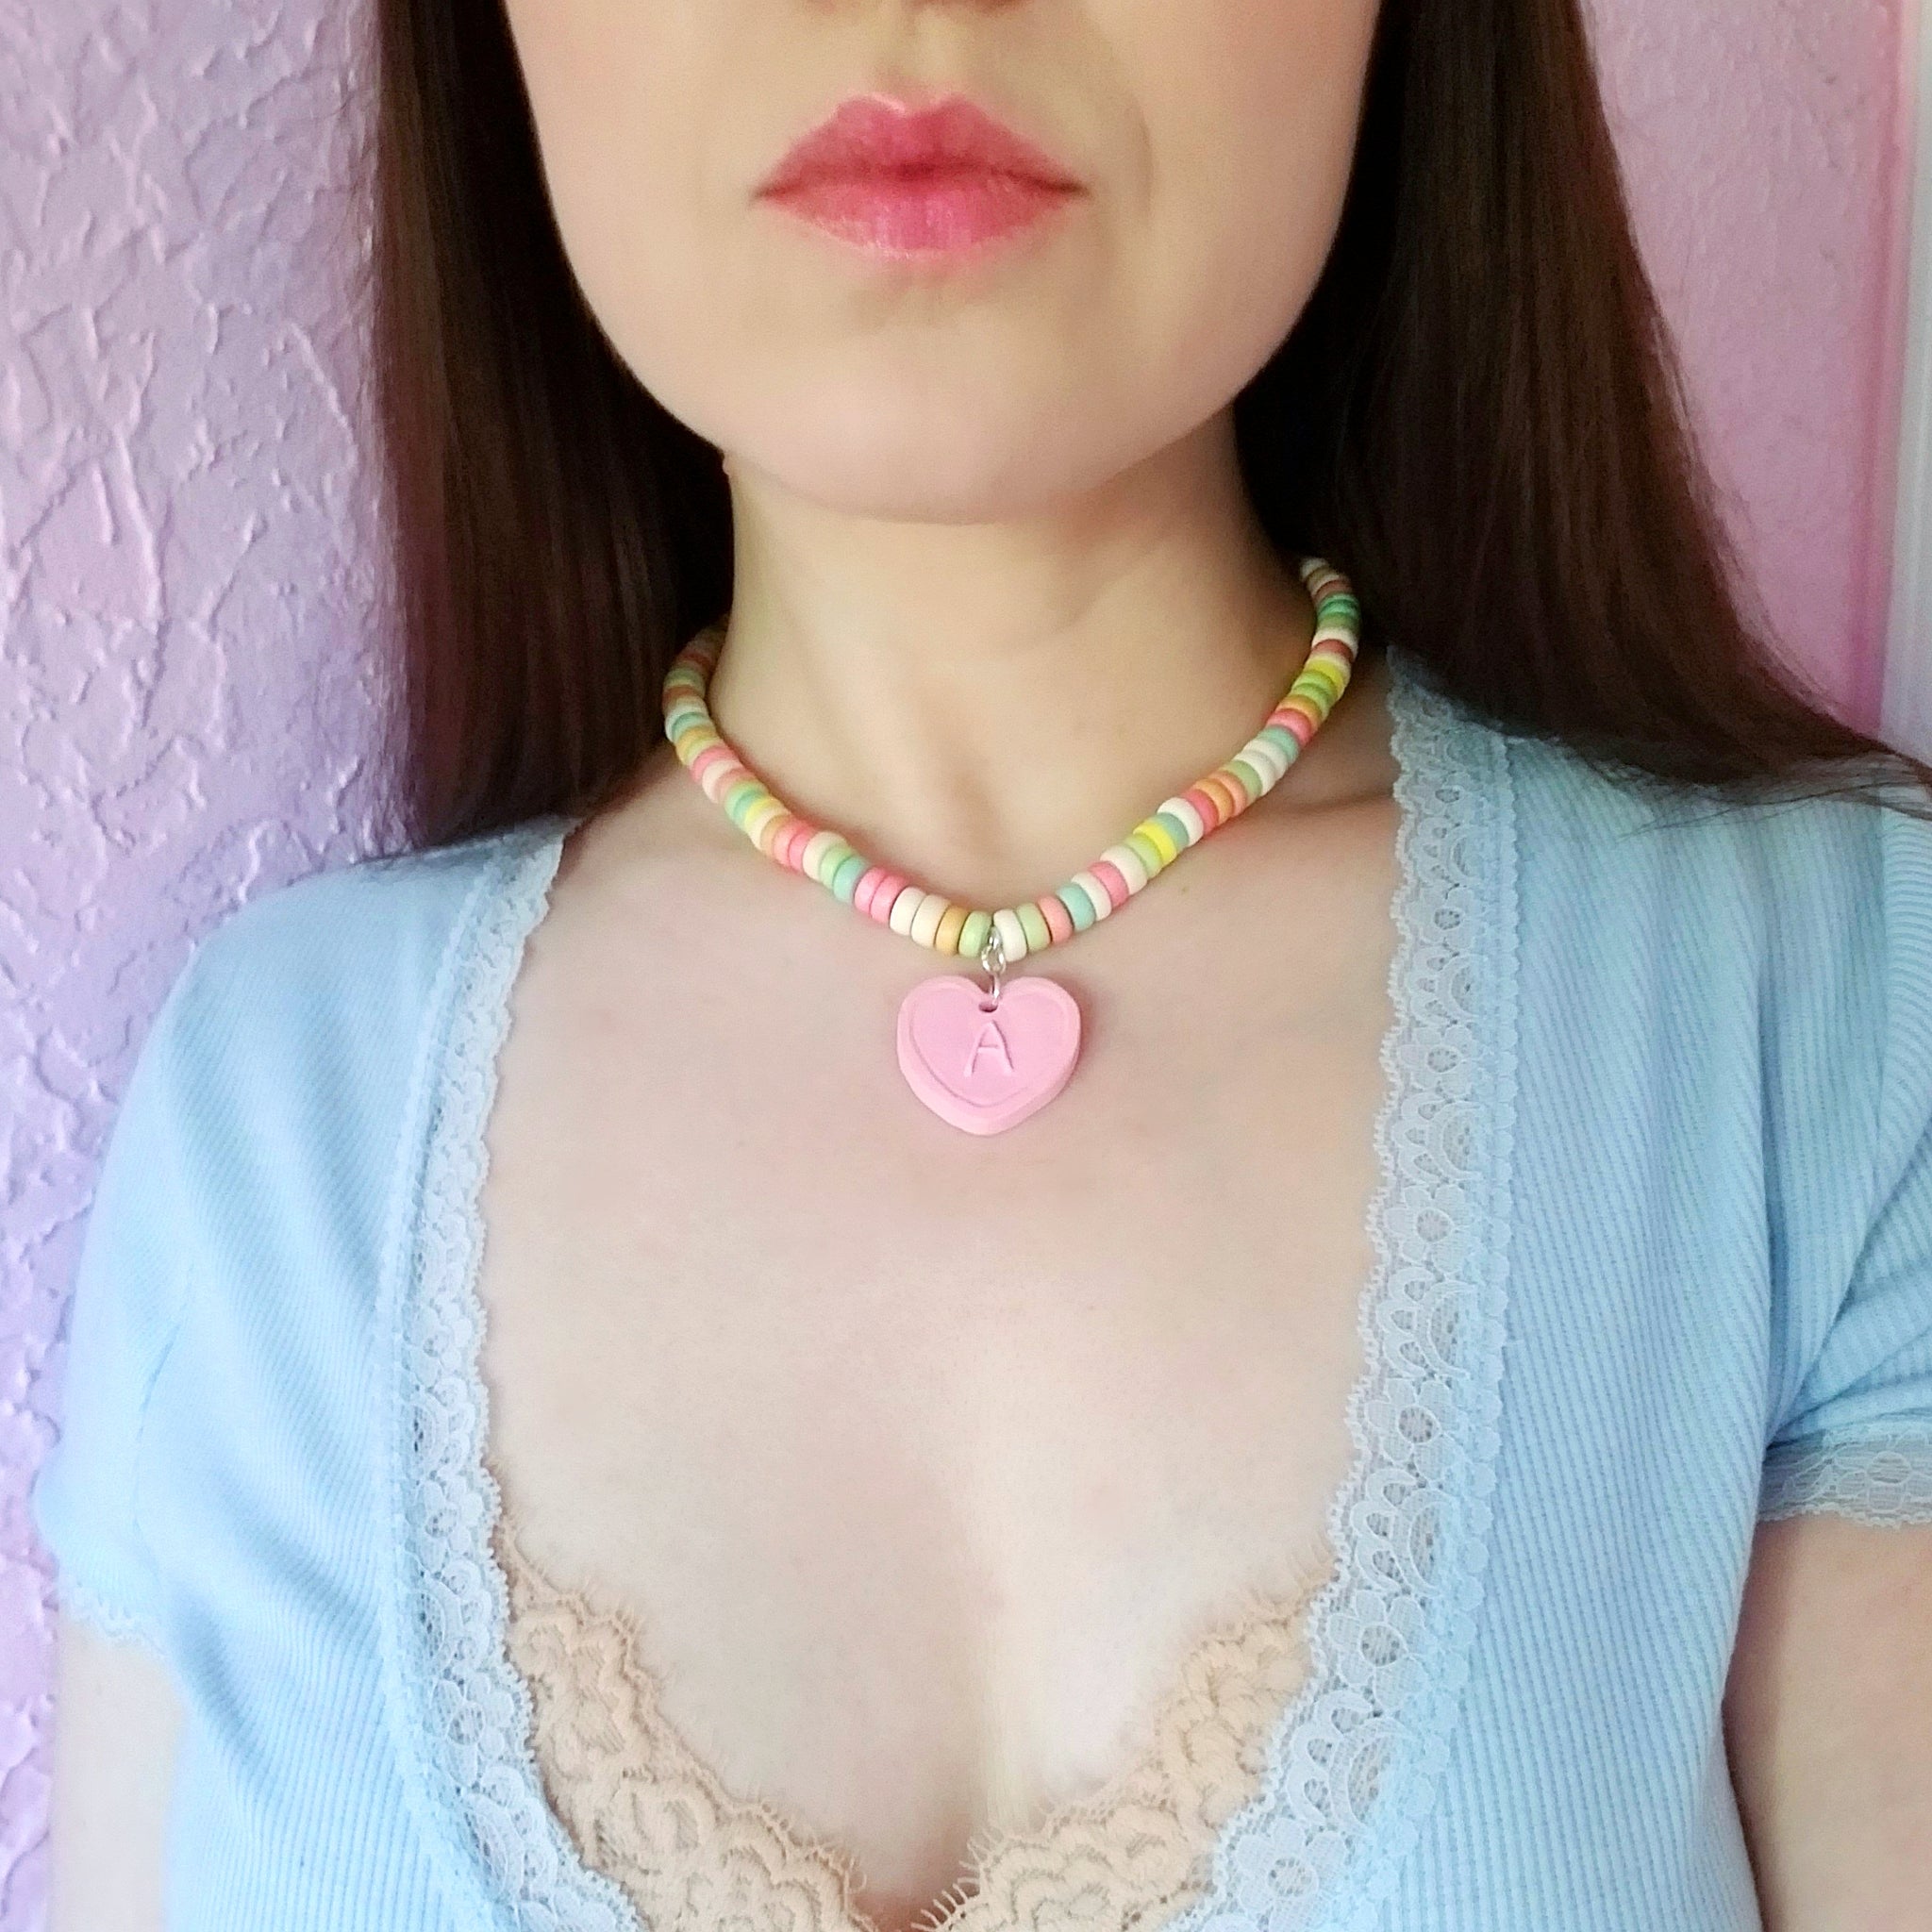 Custom Name Necklace, Personalized Candy Necklace, Pastel Candy Choker,  Rainbow Kawaii Food Jewelry 